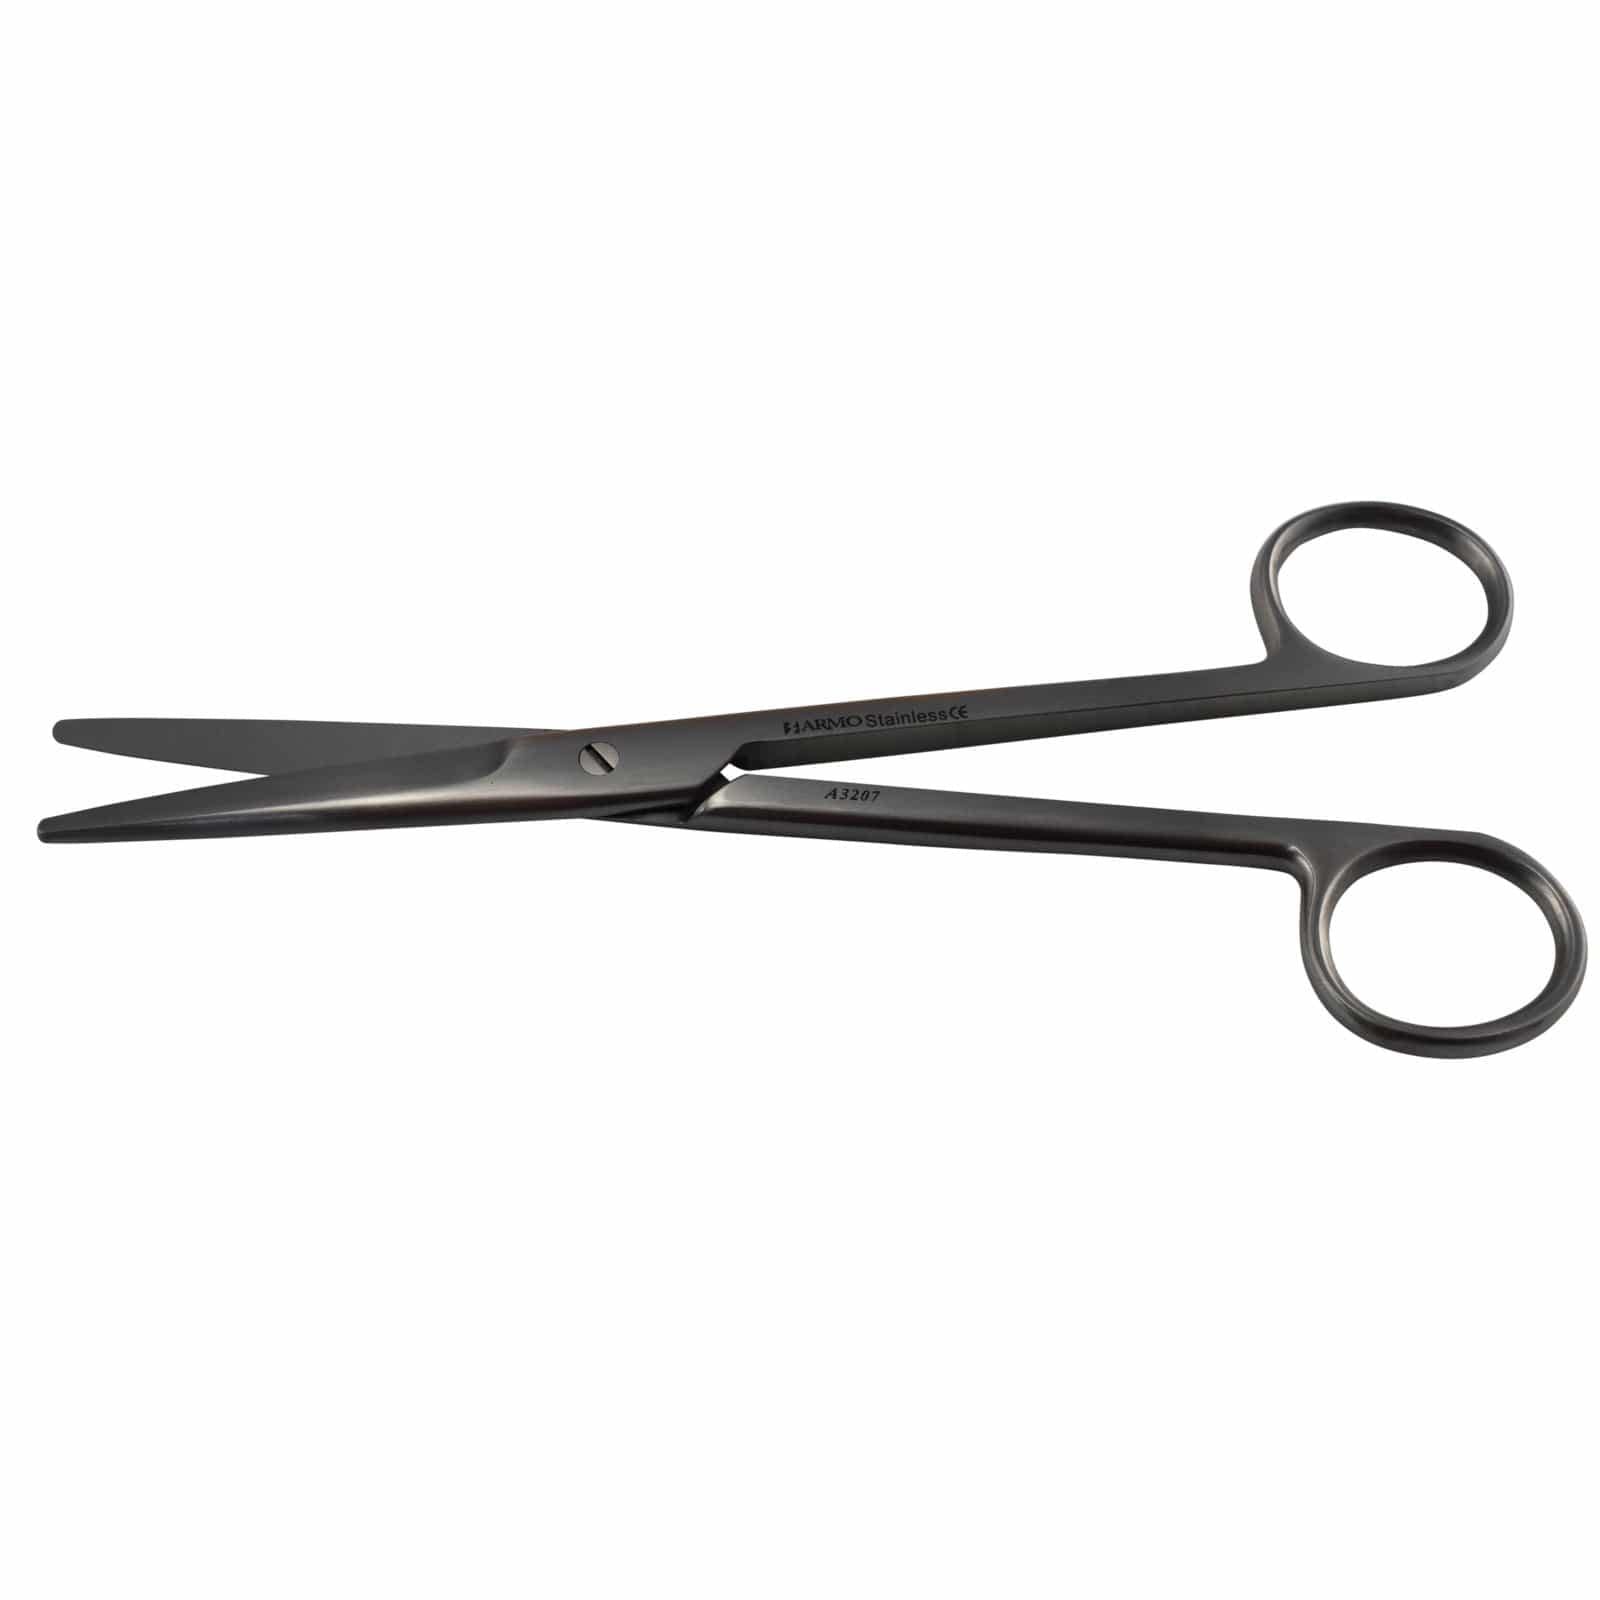 Armo Surgical Instruments 17cm / Straight / Standard Armo Mayo Scissors